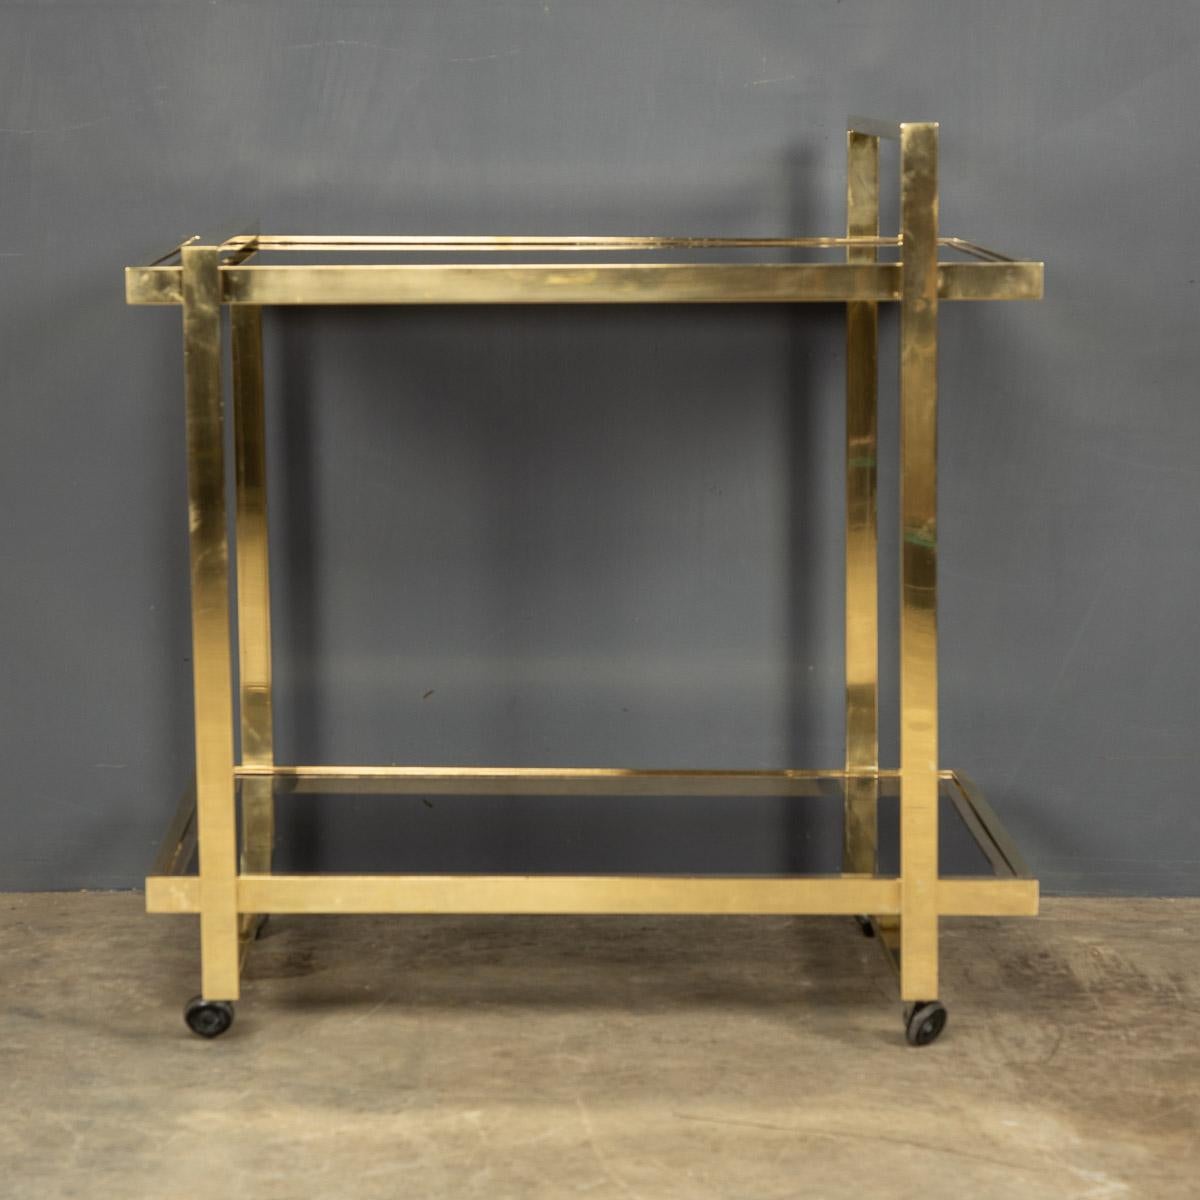 Stylish mid-20th century two-tier brass drinks trolley with lift off serving tray and bottle holder.

Condition
In good condition - some wear consistent with age.

Size
Width: 75cm
Depth: 53cm
Height: 78cm
Height top shelf: 67cm.